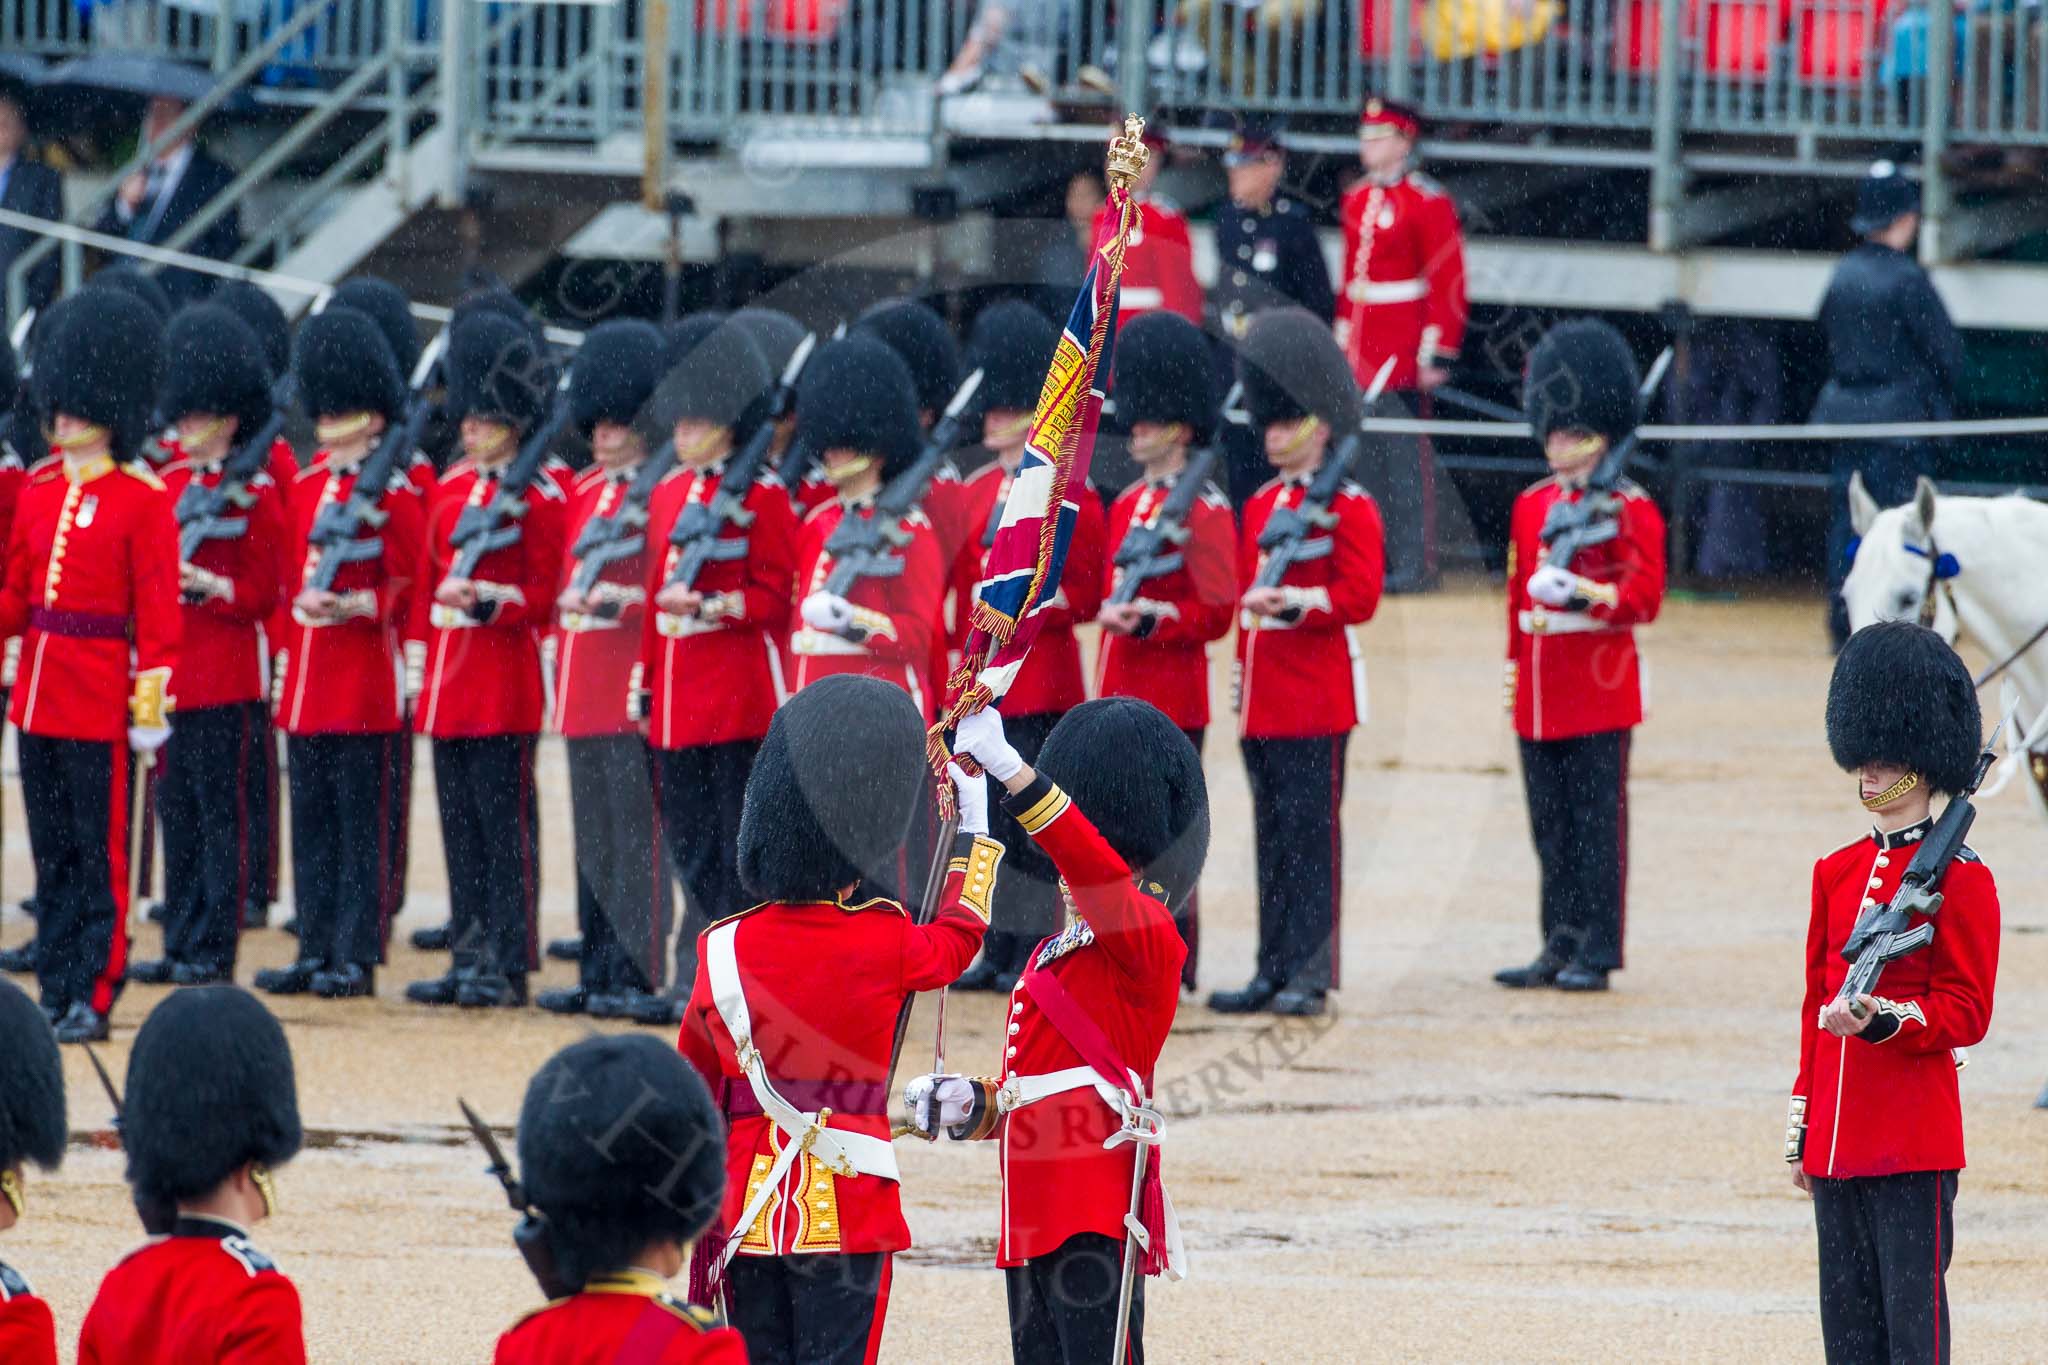 The Colonel's Review 2014.
Horse Guards Parade, Westminster,
London,

United Kingdom,
on 07 June 2014 at 11:19, image #397